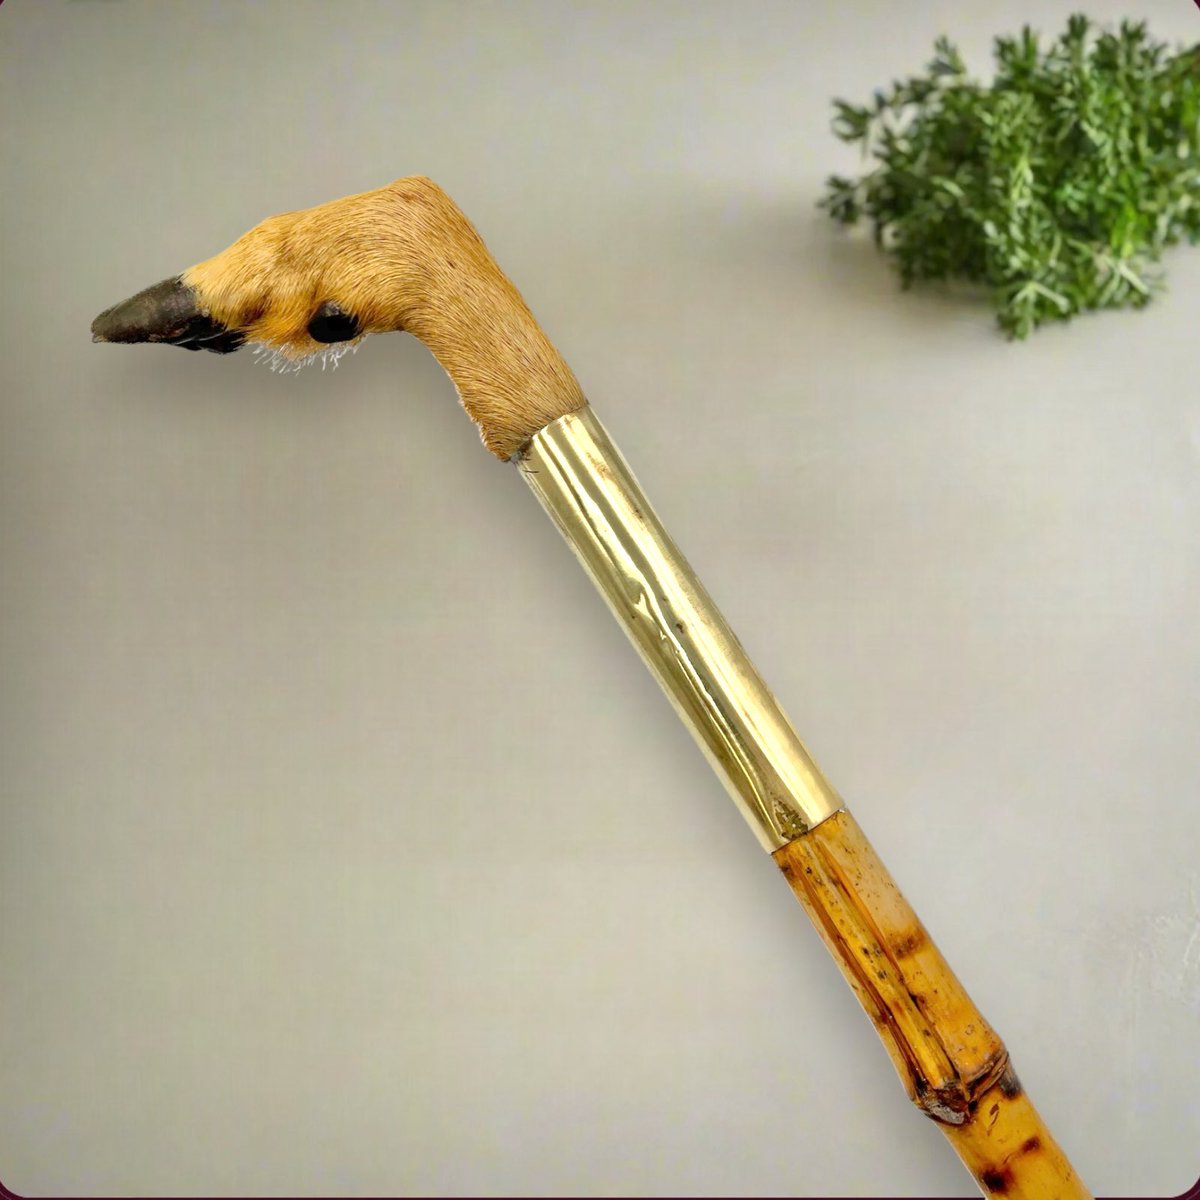 French vintage bamboo walking cane with deer handle £89.99 #taxidermy #huntinggift #buyvintage allthingsfrenchstore.com/products/taxid…